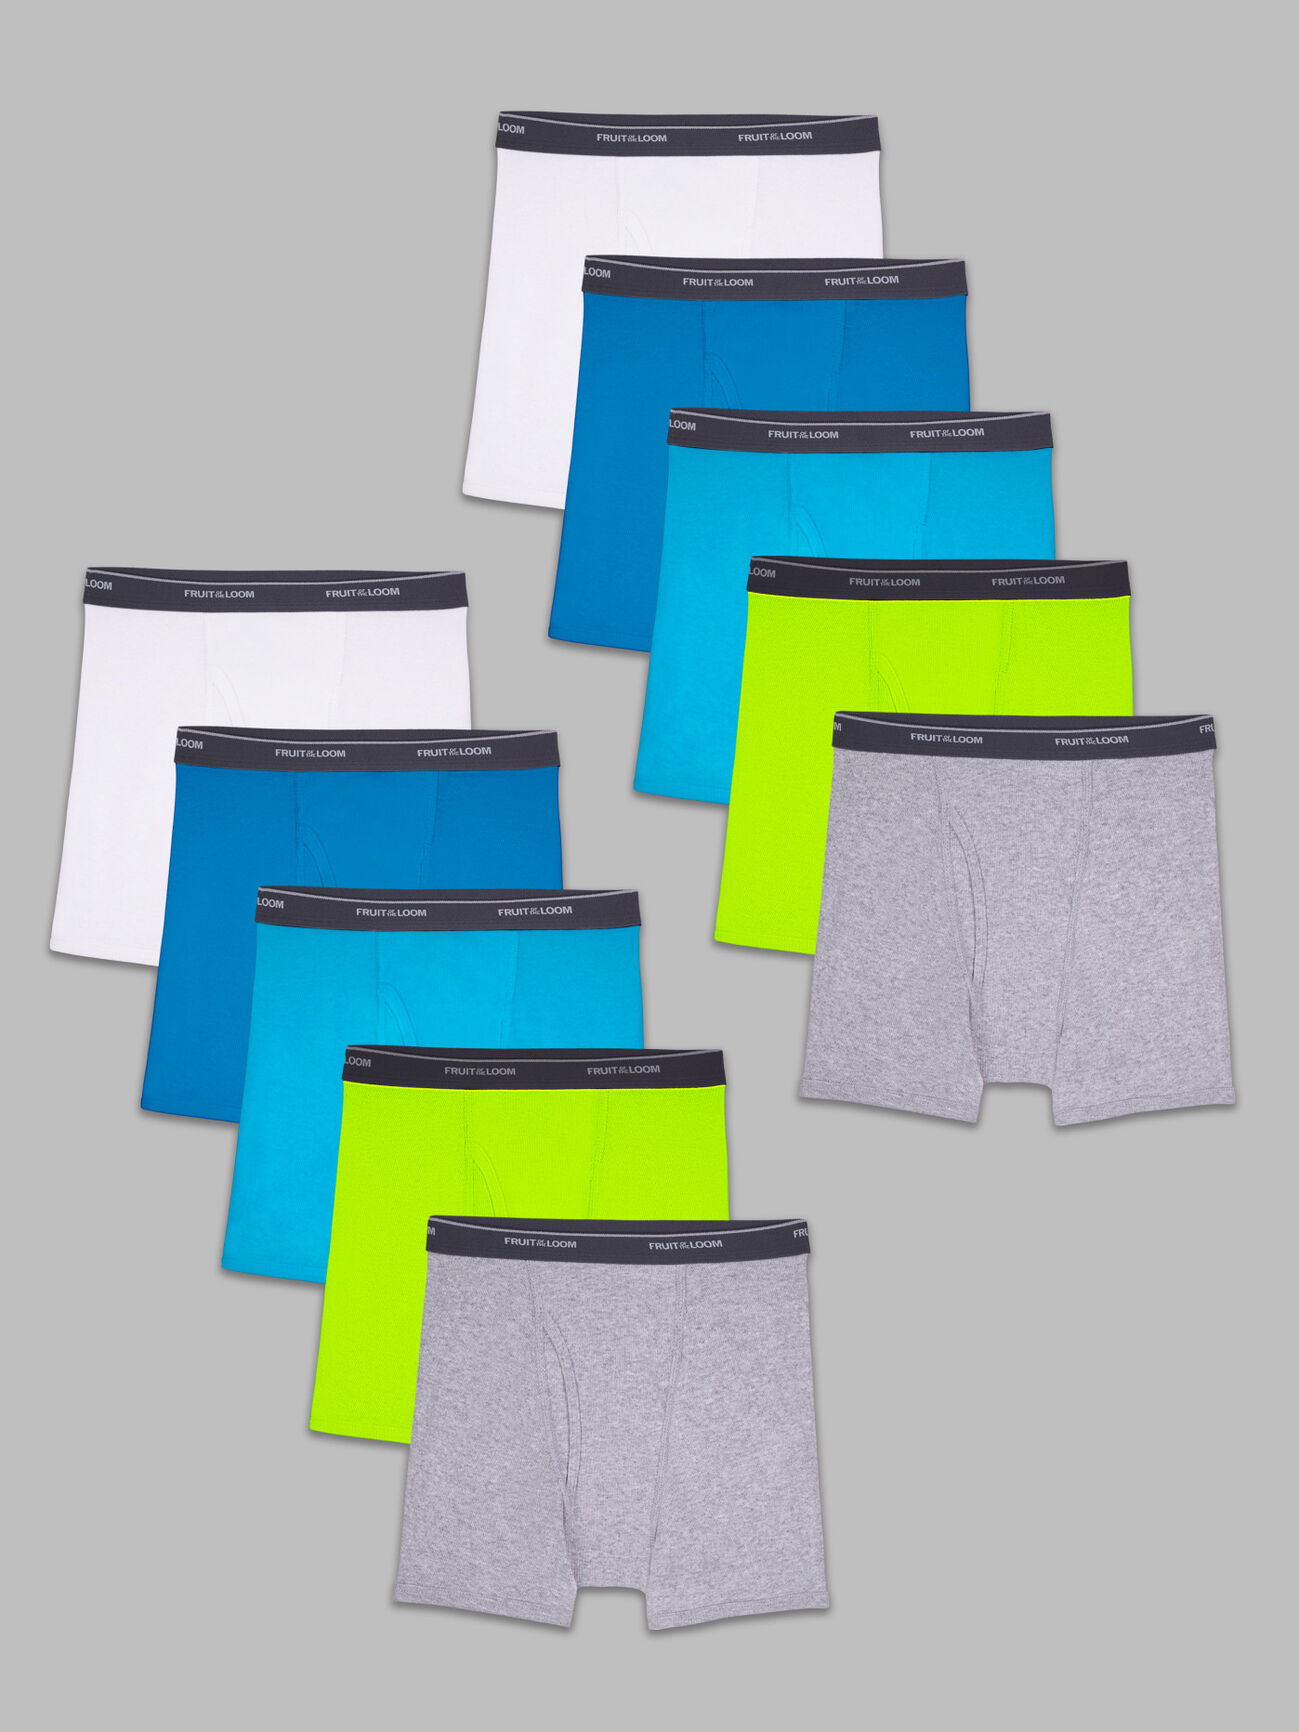 Athletic Works Boys' Performance Briefs 2-Pack, Sizes S-XL